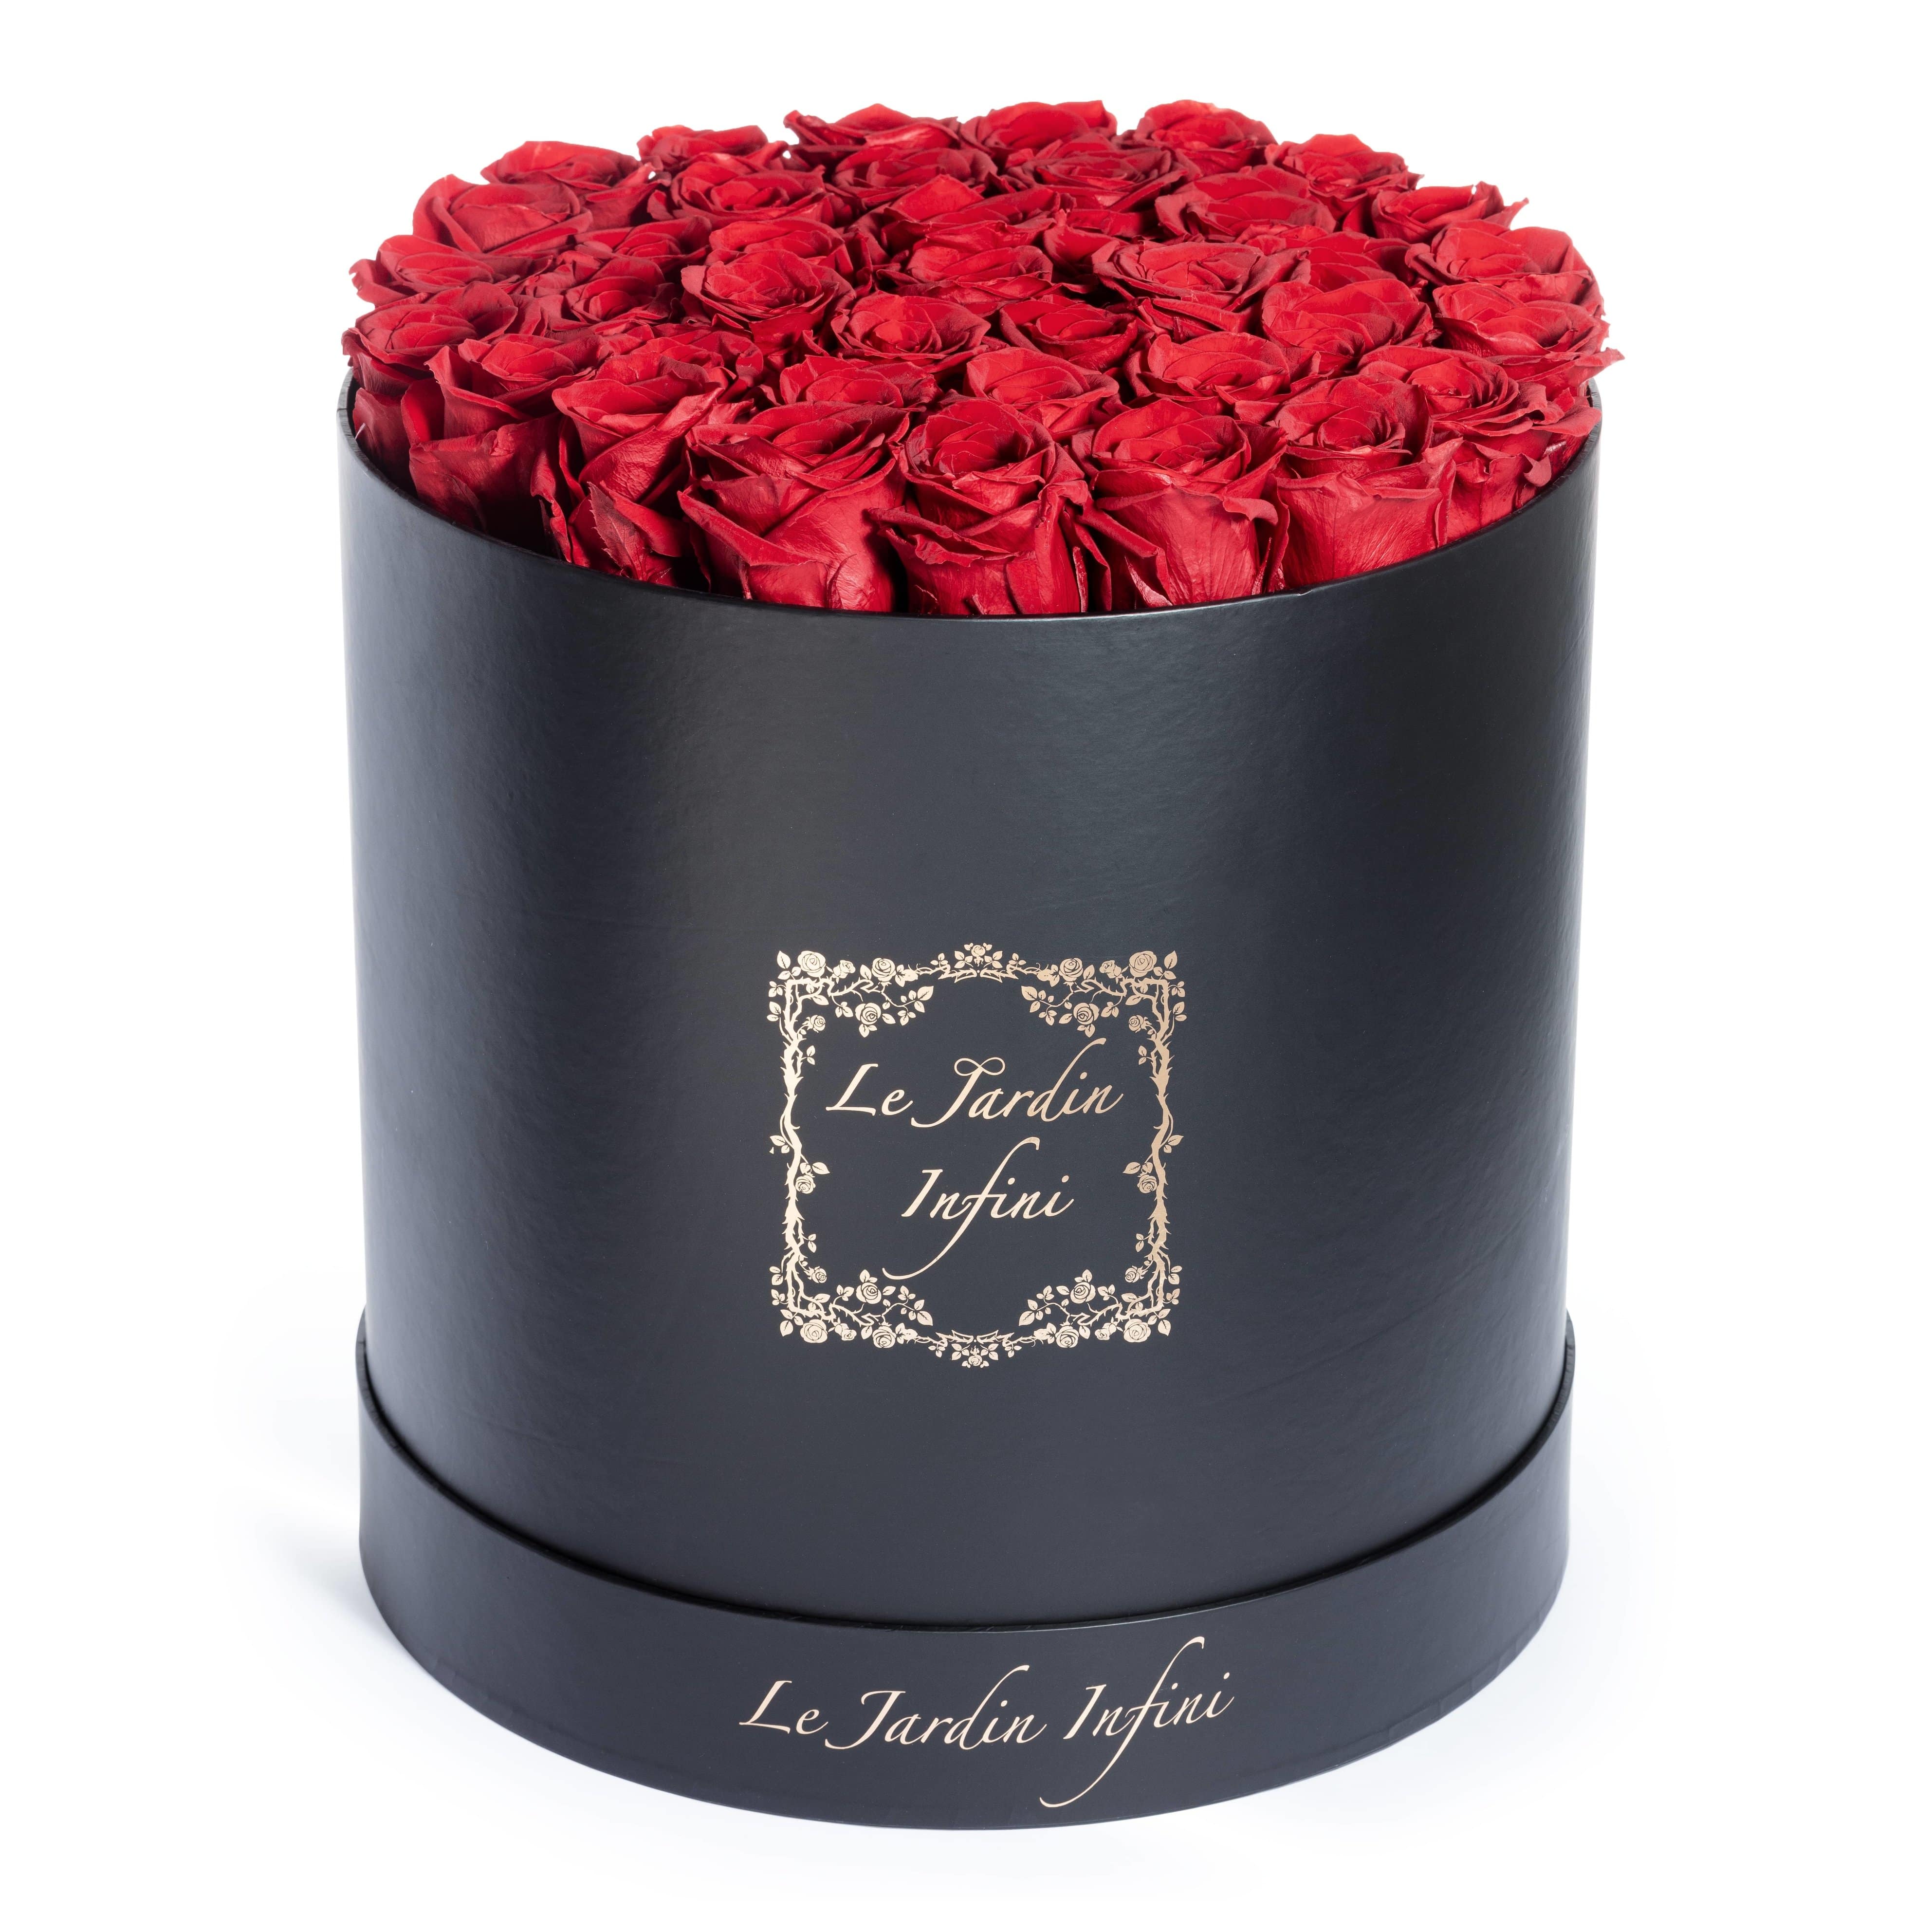 Red Preserved Roses - Large Round Black Box